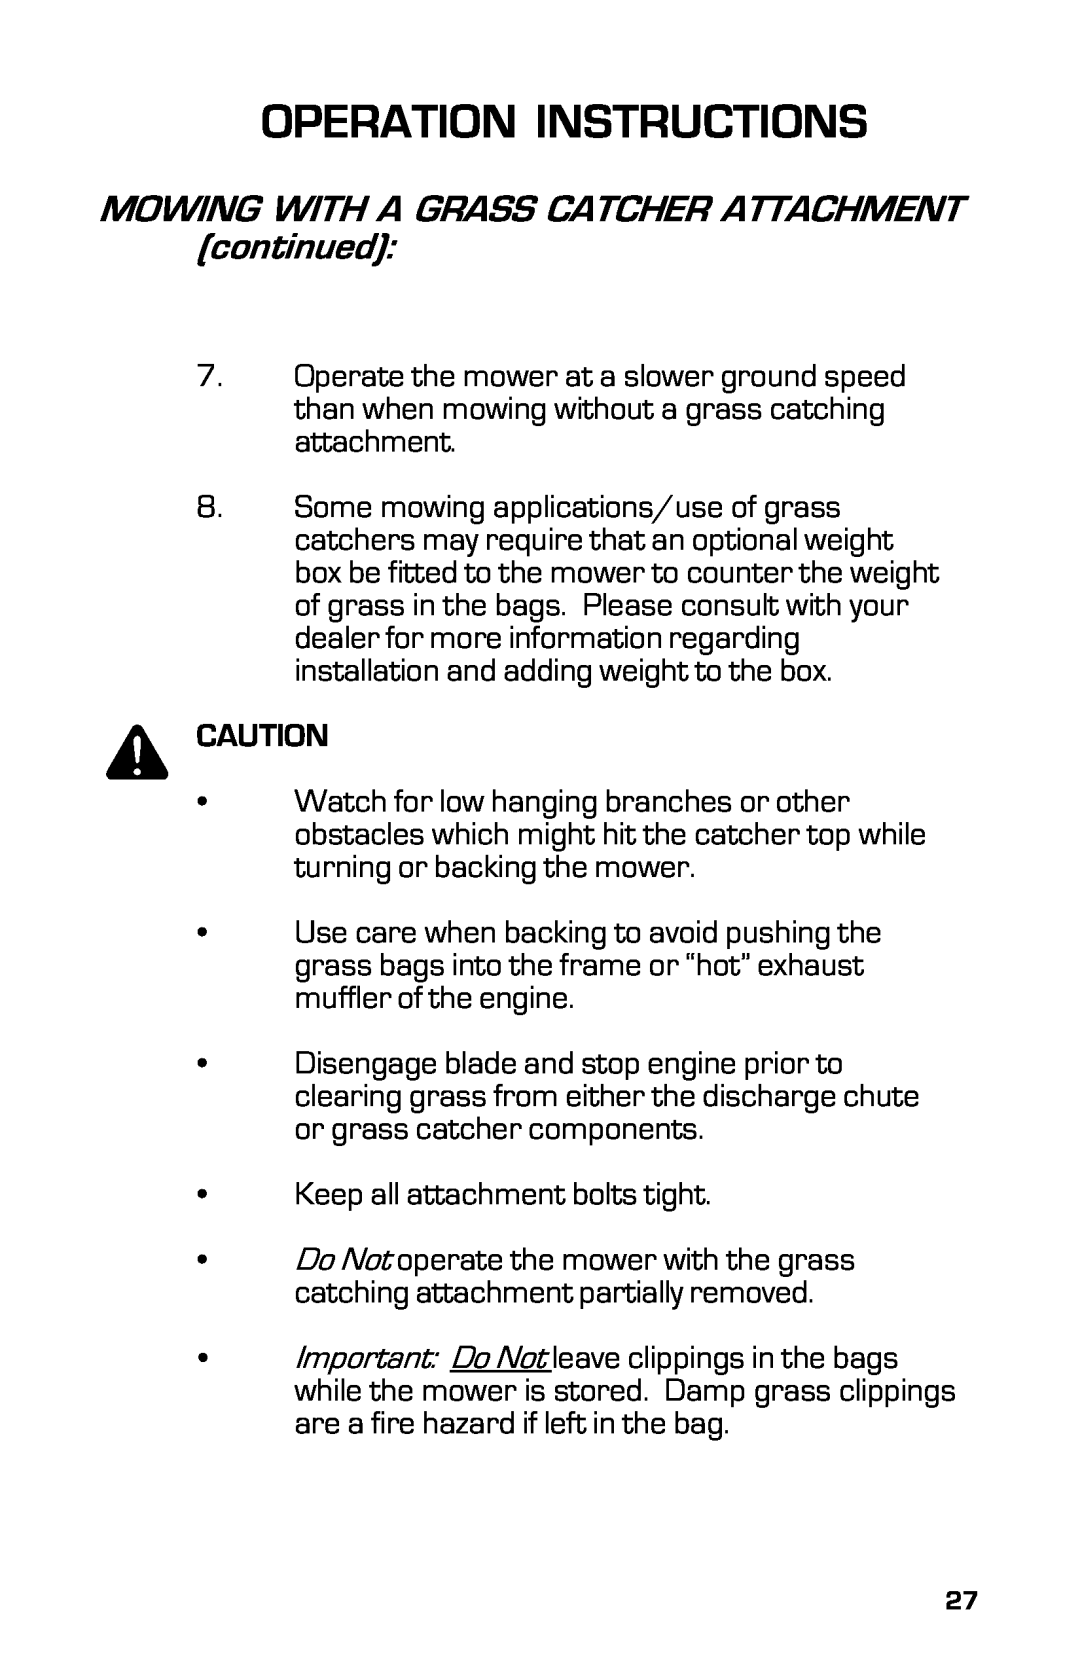 Dixon 13639-0702, 2003 manual Operation Instructions, MOWING WITH A GRASS CATCHER ATTACHMENT continued 